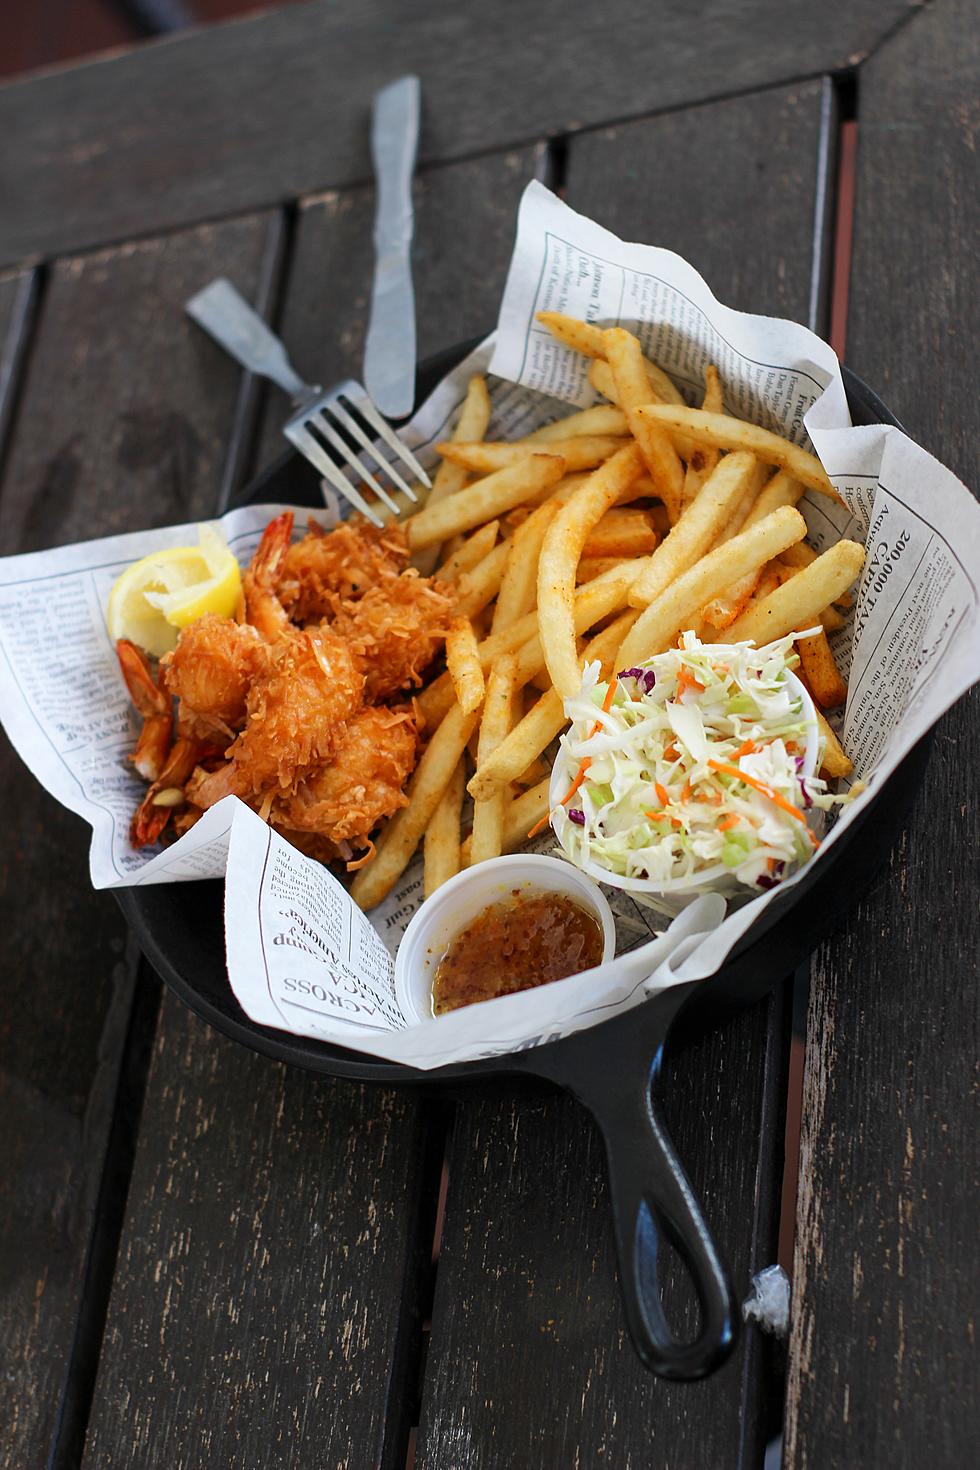 GALLERY: Where Are The Best Fish Fries In The Southern Tier?